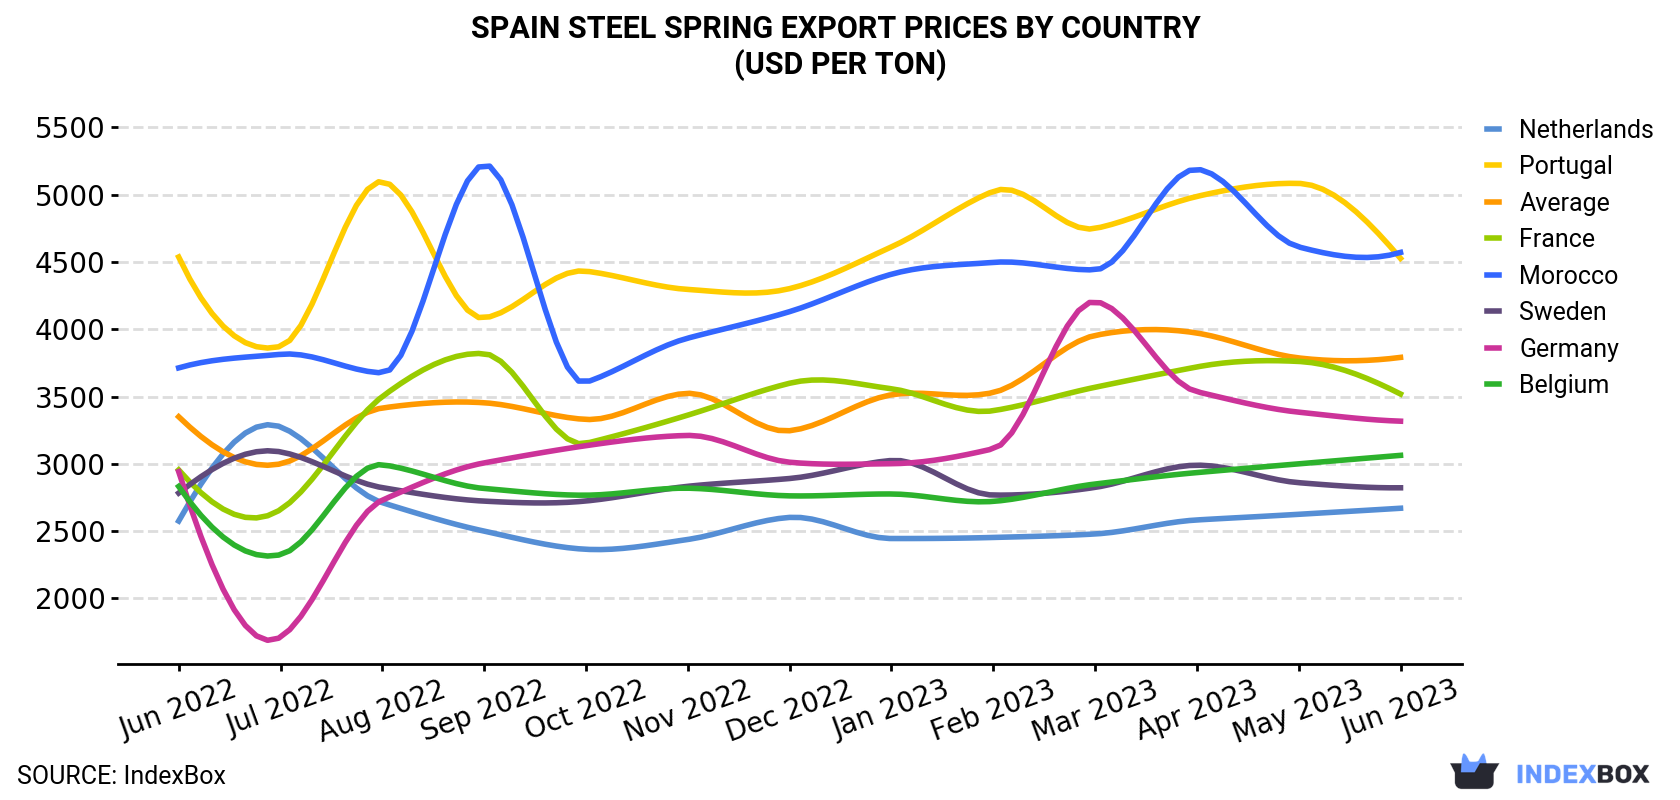 Spain Steel Spring Export Prices By Country (USD Per Ton)